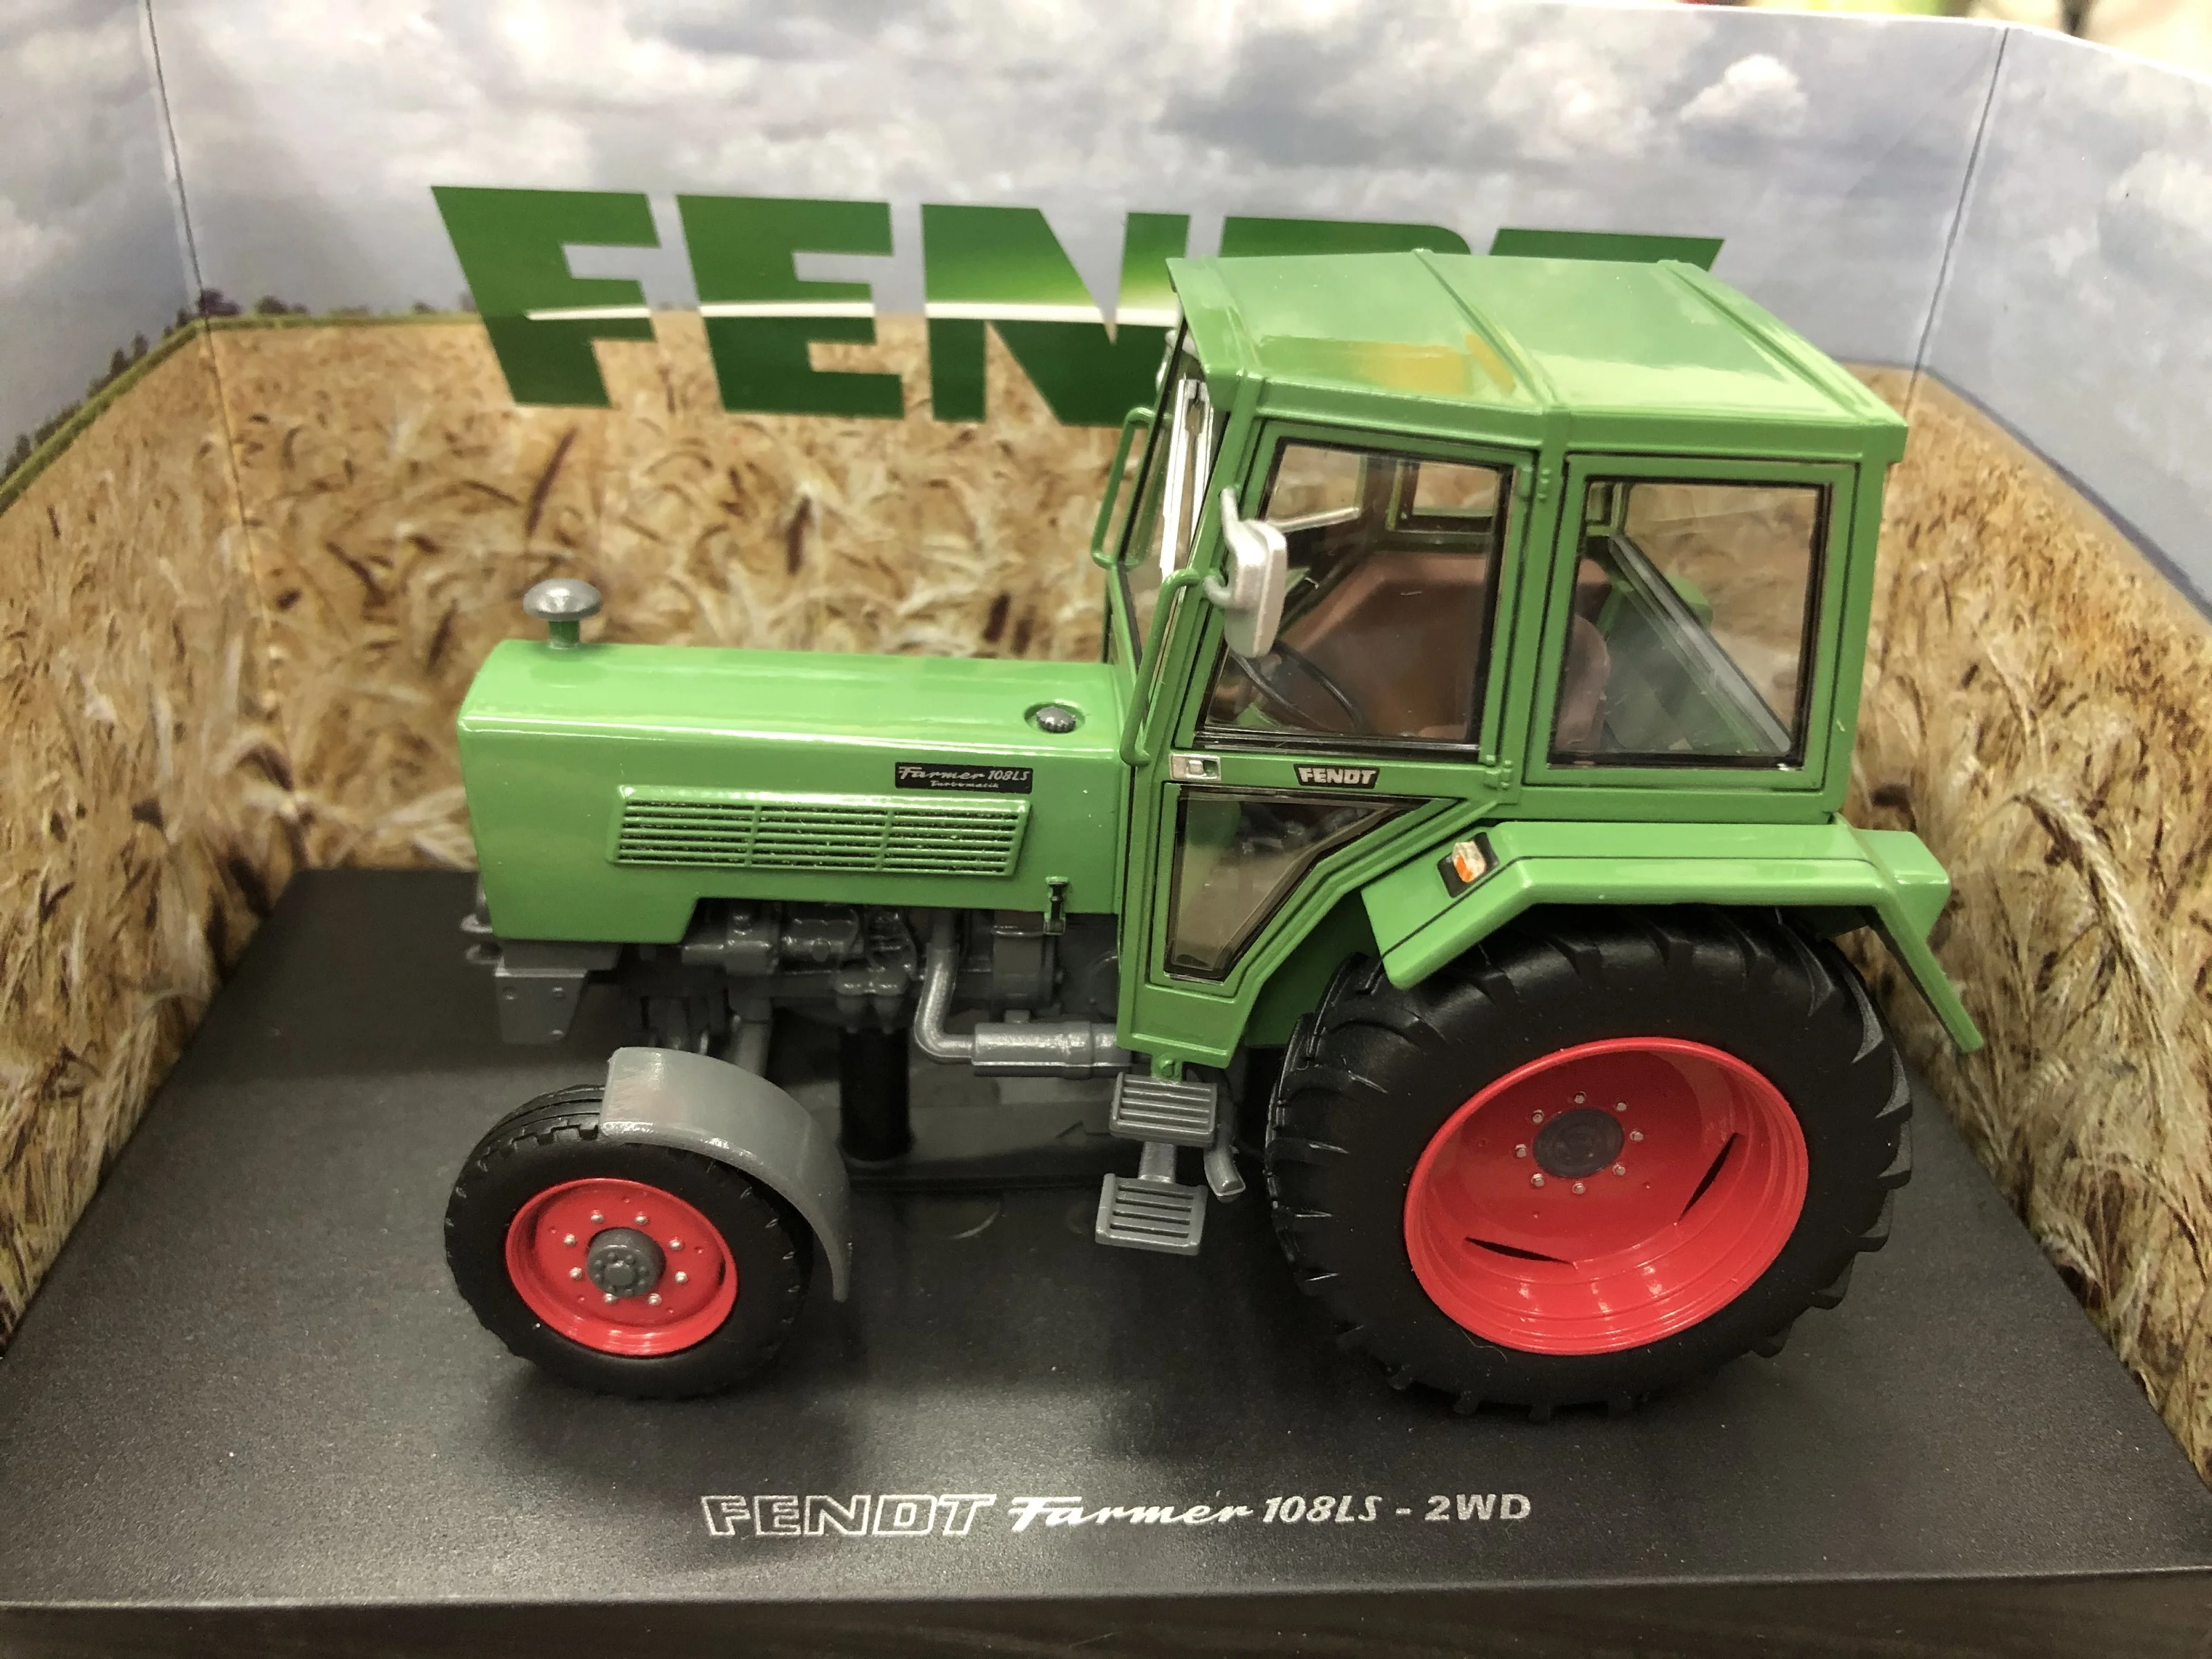 

Collectible Alloy Model Toy Gift UH 1:32 Scale Fendt Farmer 108LS-2WD Tractor Agricultural Farm Vehicles DieCast Toy Model 5314